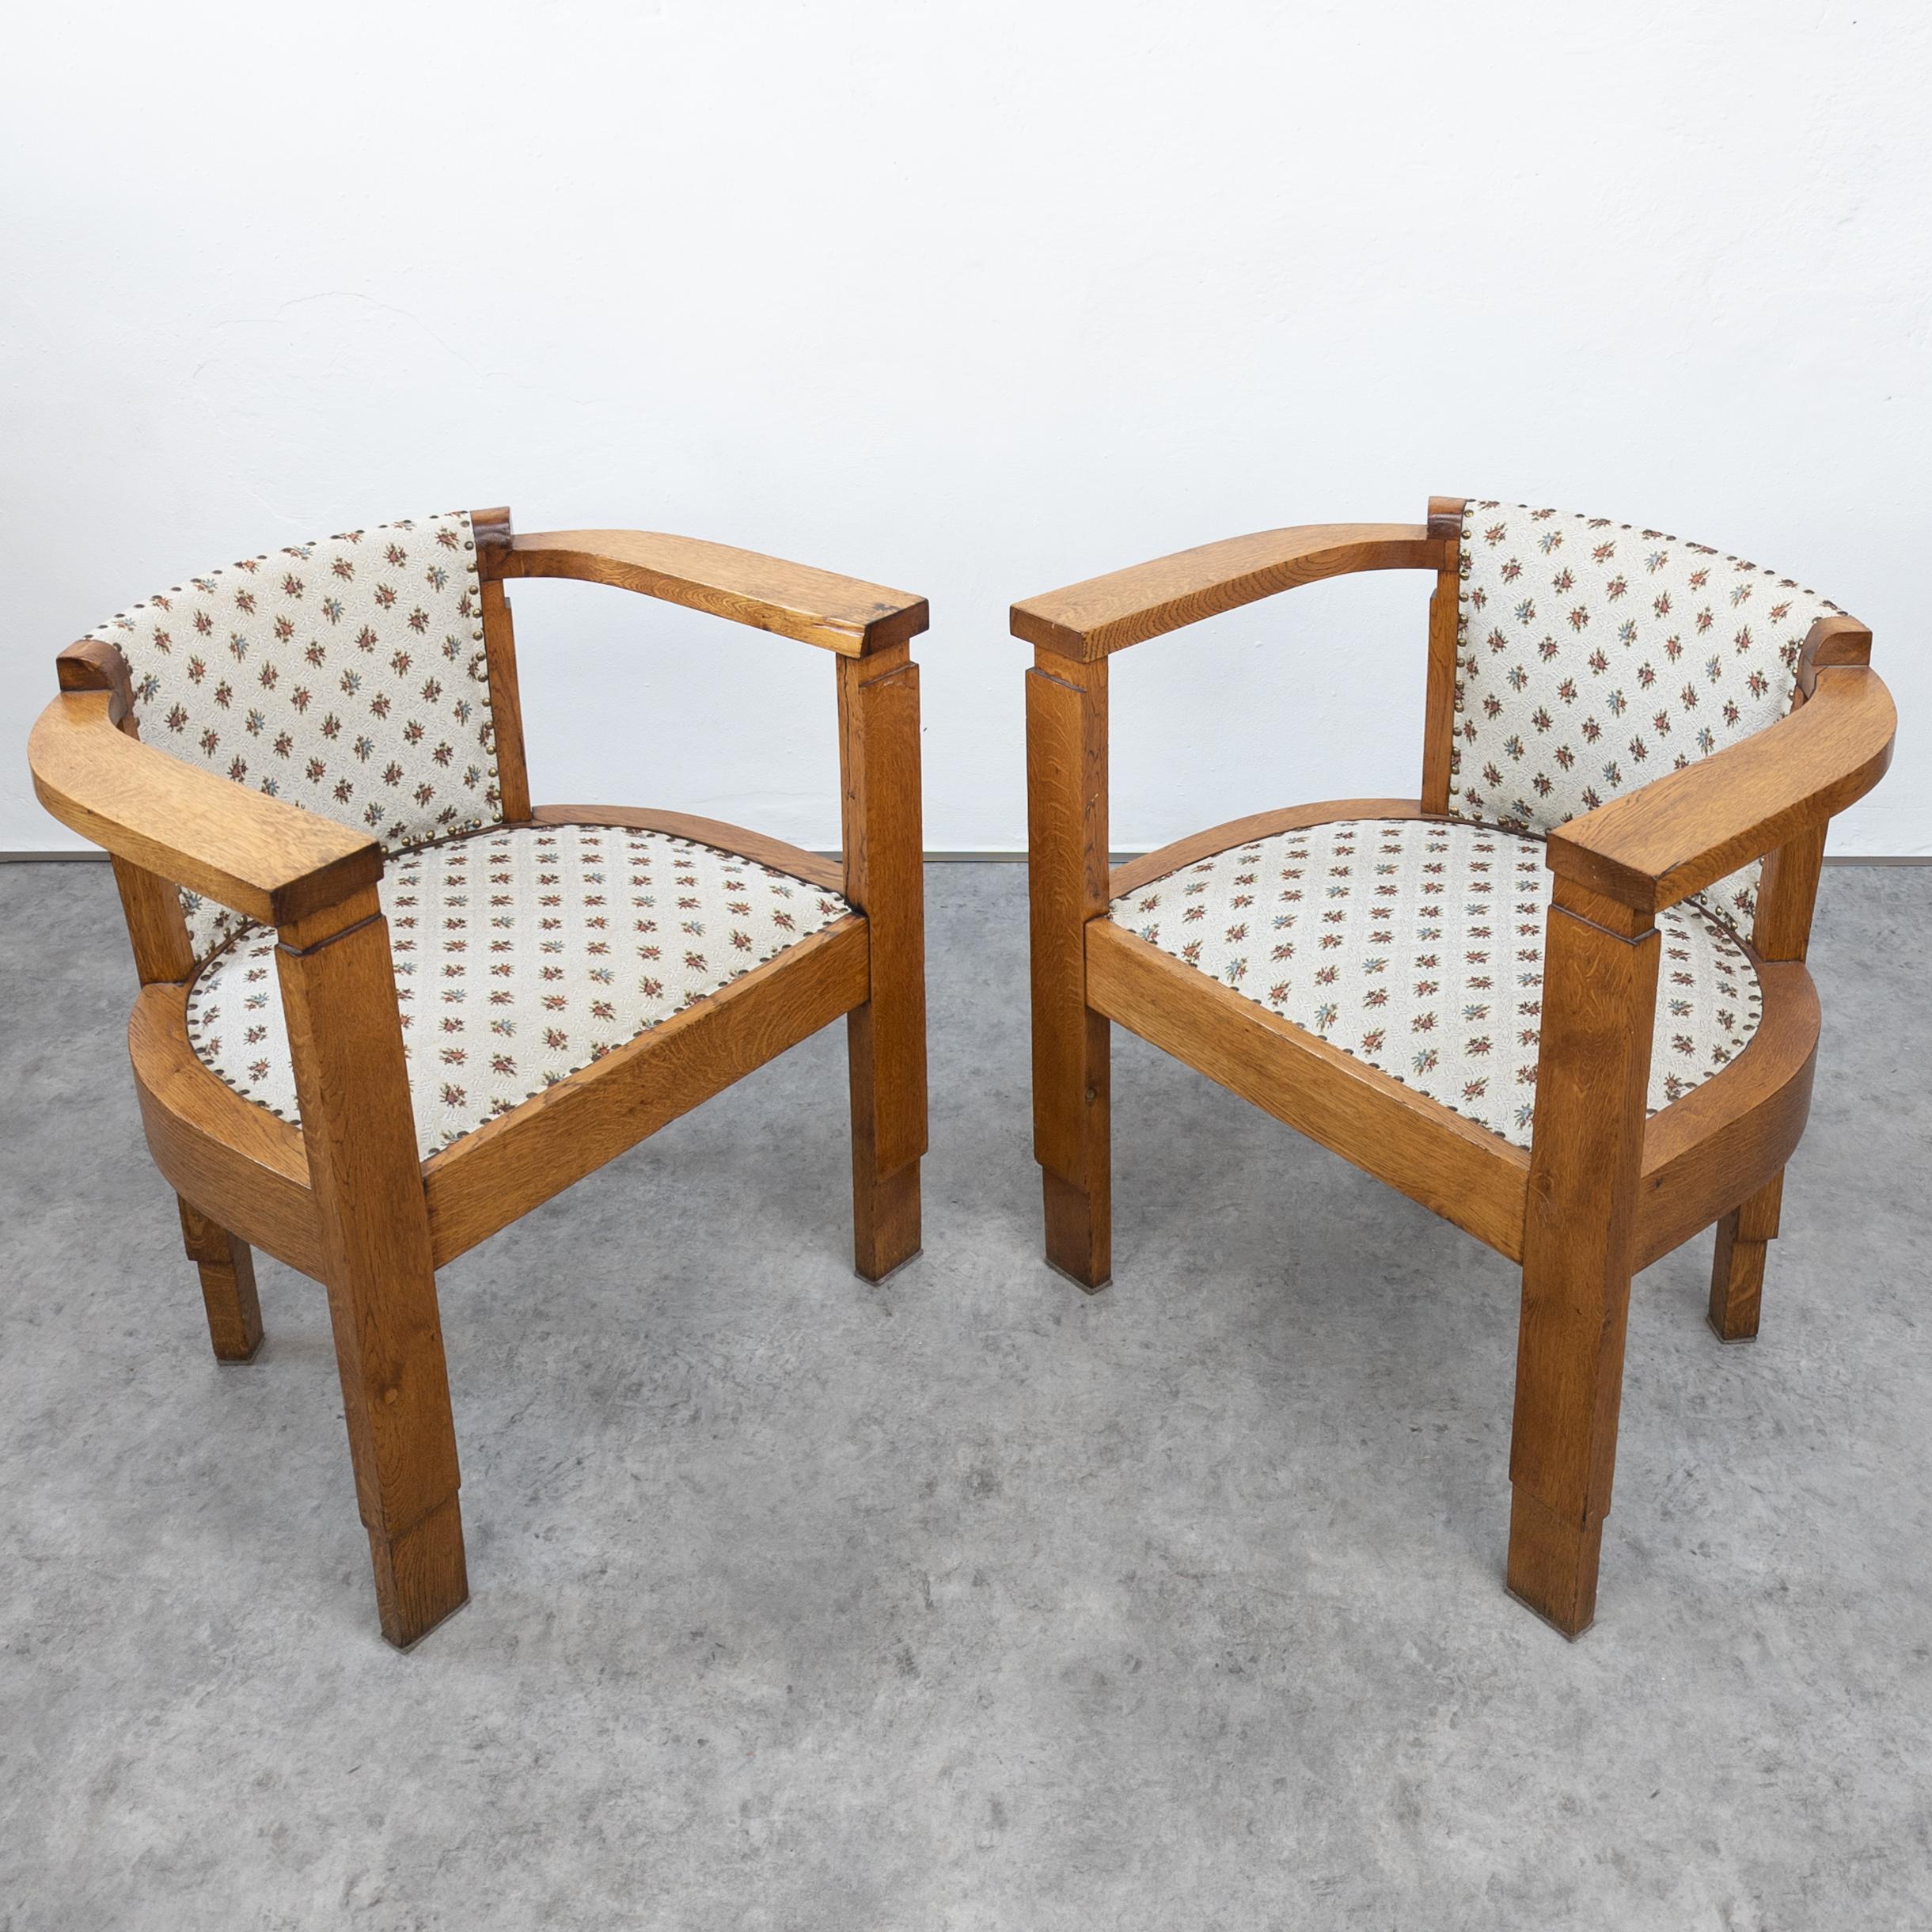 Mid-20th Century Pair of Art Deco Sculptural Club Chairs For Sale